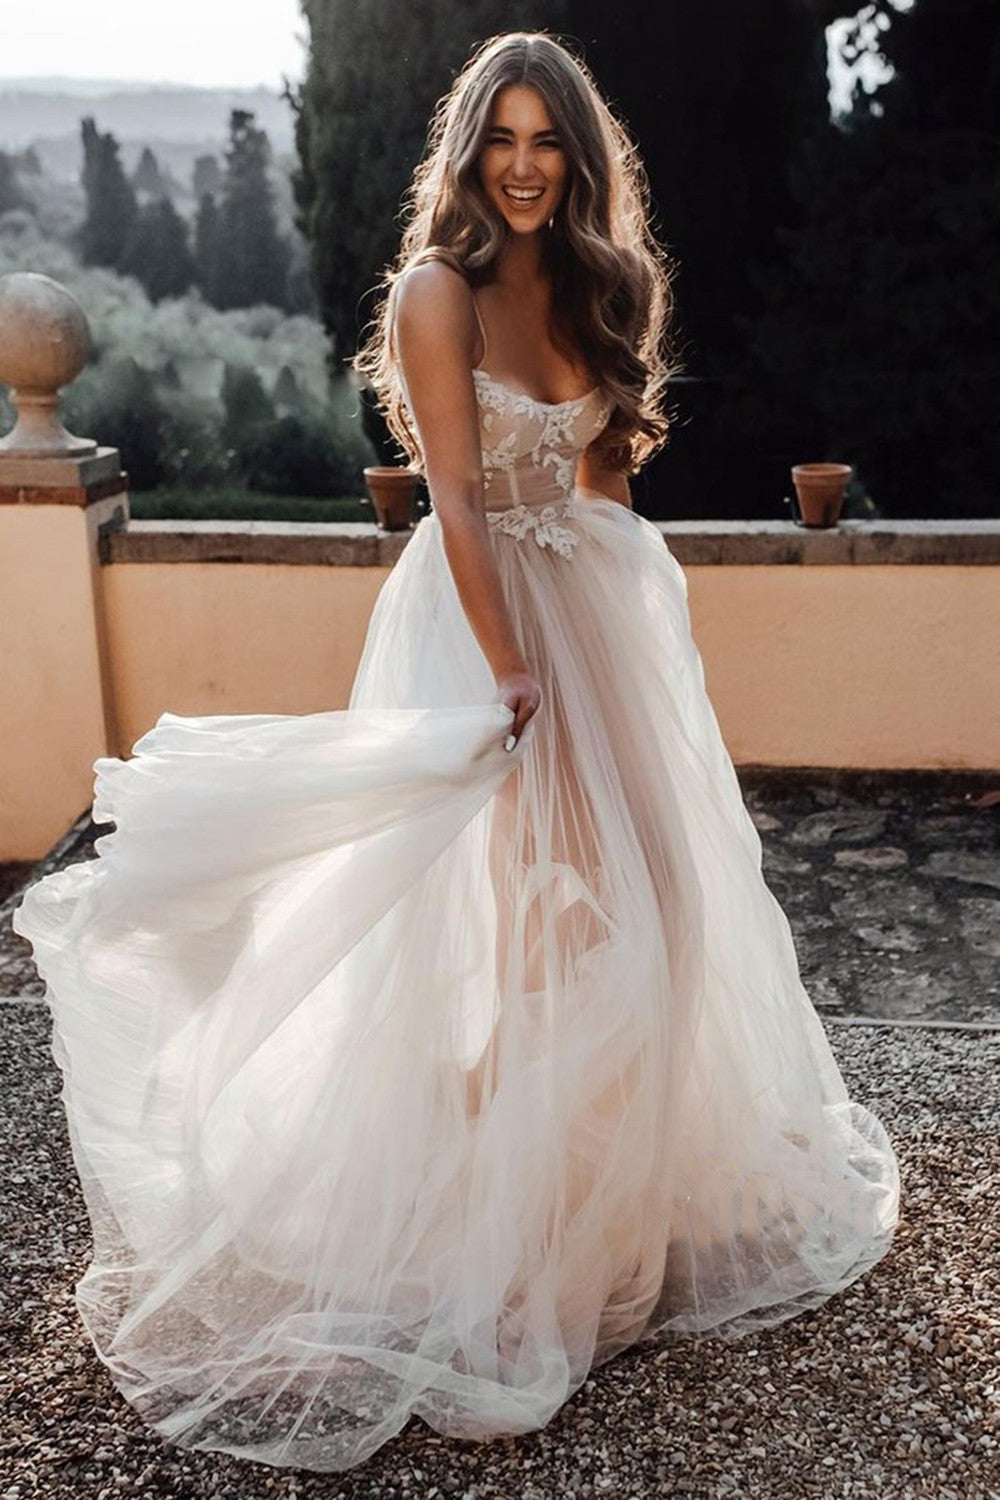 Spaghetti Straps Scoop Wedding Dresses, Tulle A Line Wedding Dresses, Lace Wedding Dresses